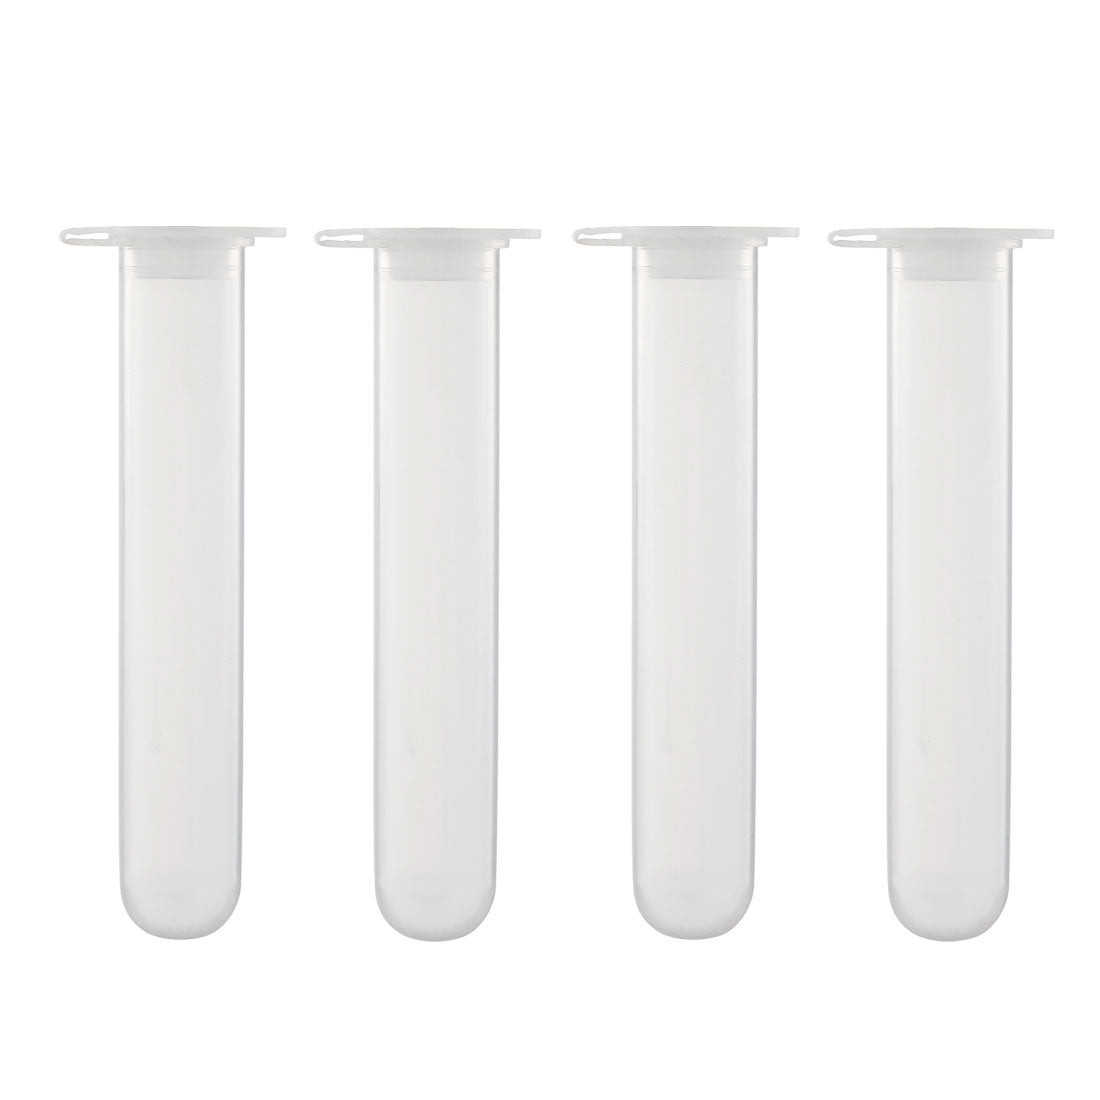 uxcell Uxcell 10 Pcs 15ml Plastic Centrifuge Tubes with Attached Cap, Round Bottom